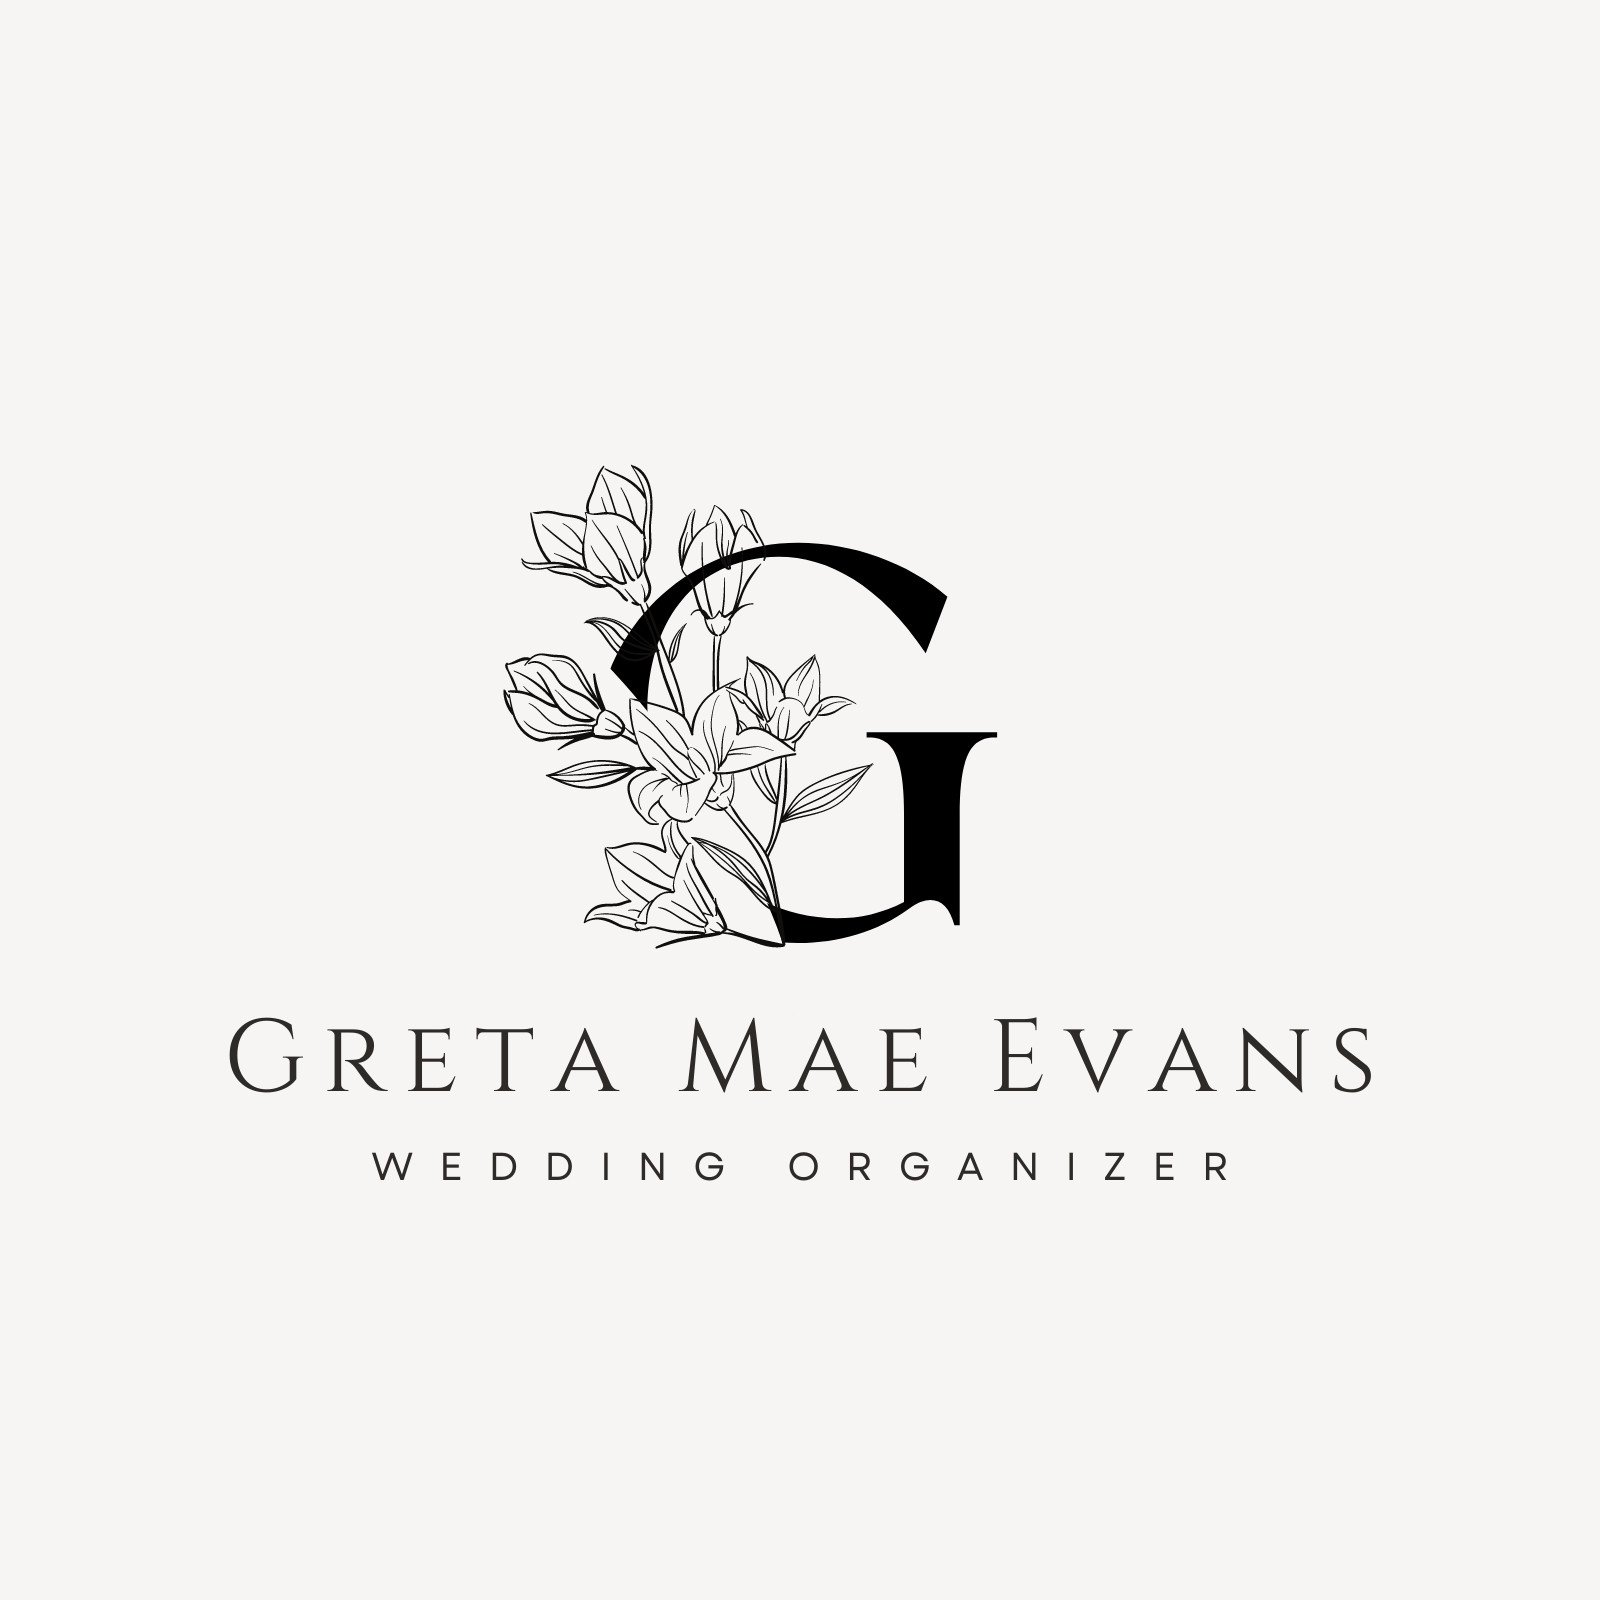 Wedding PNG Clipart, Bride And Groom Transparent PNG Images - Free  Transparent PNG Logos